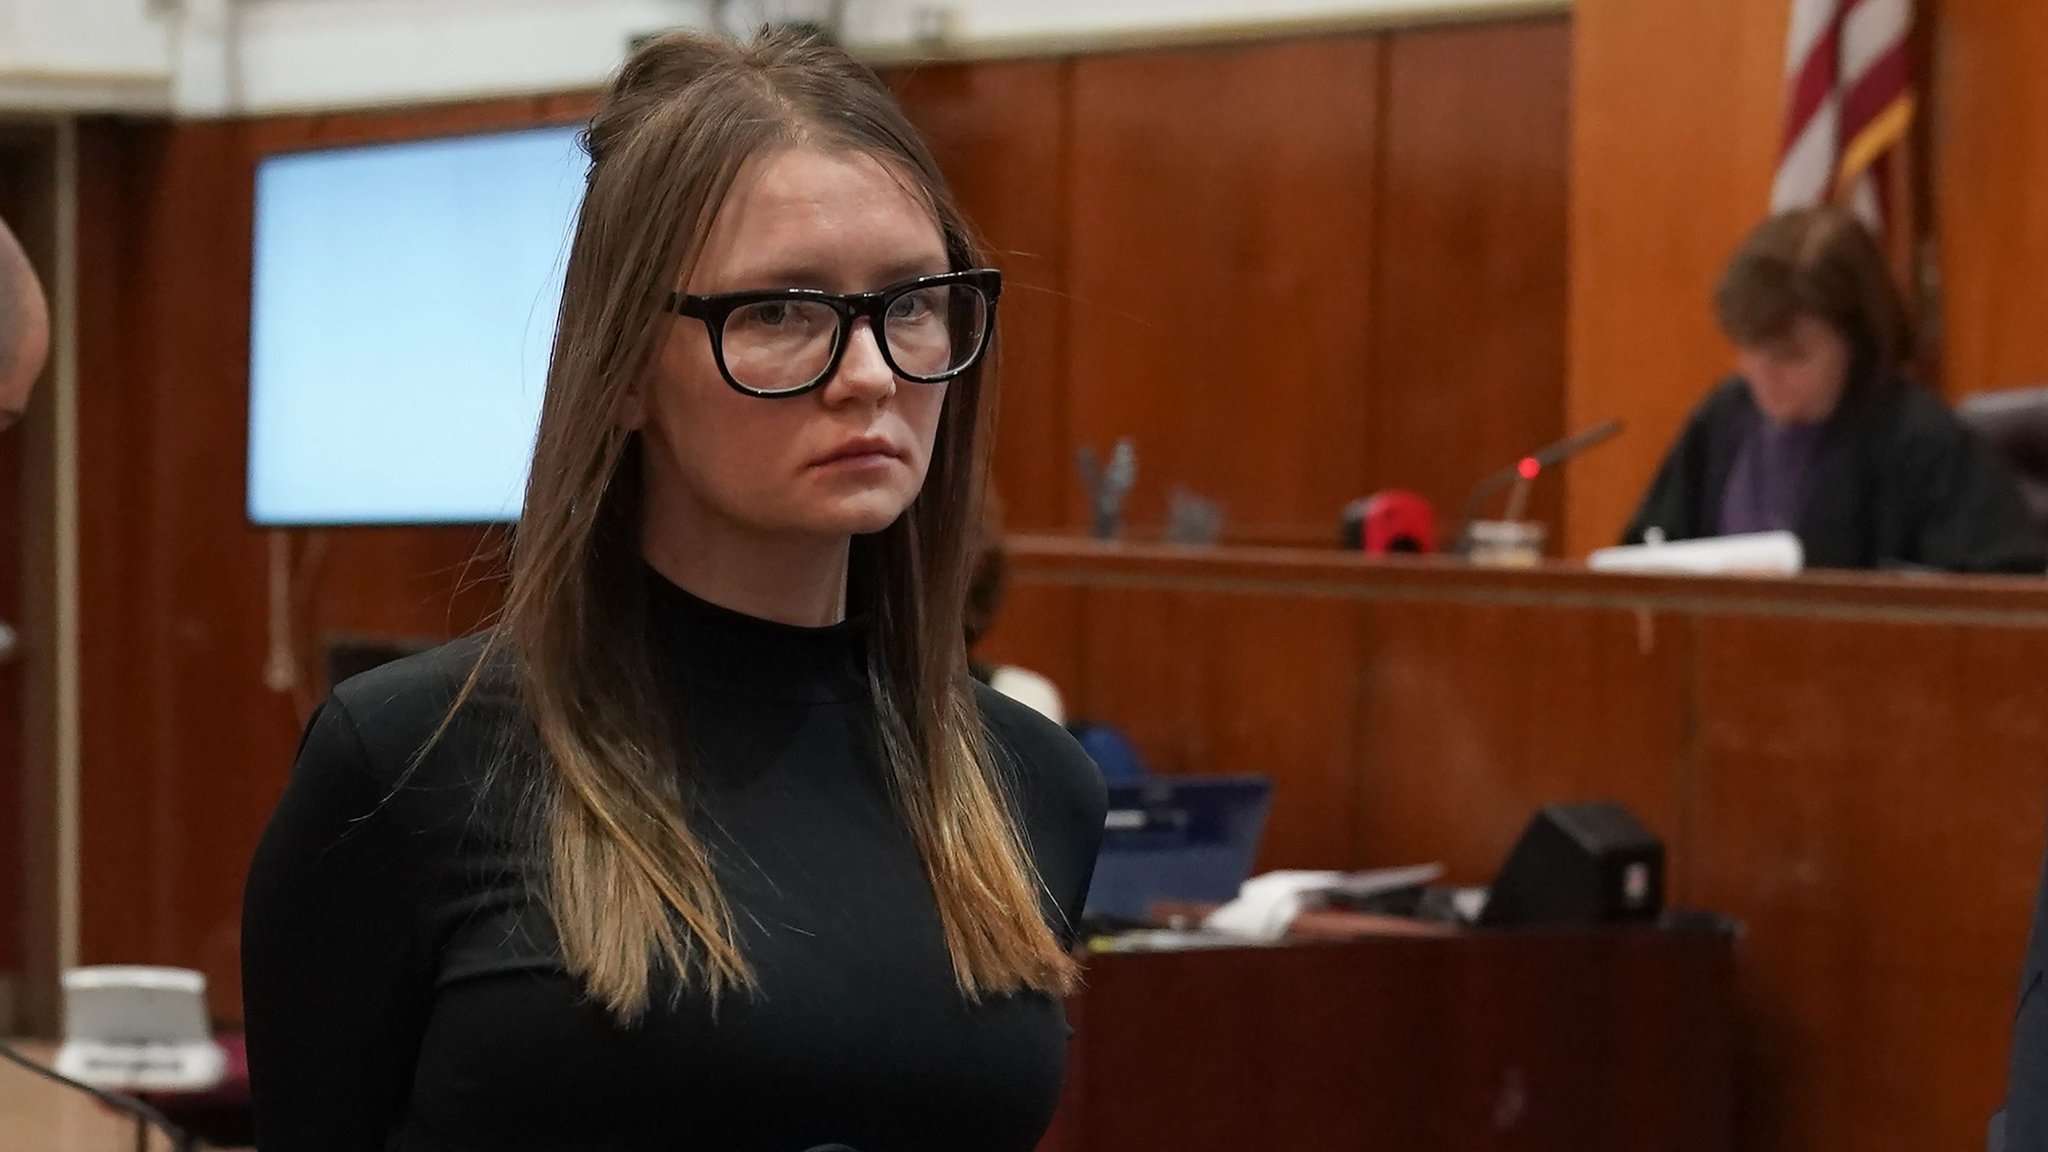 The Fake German Heiress Who Scammed New York's Elite Is Out Of Prison